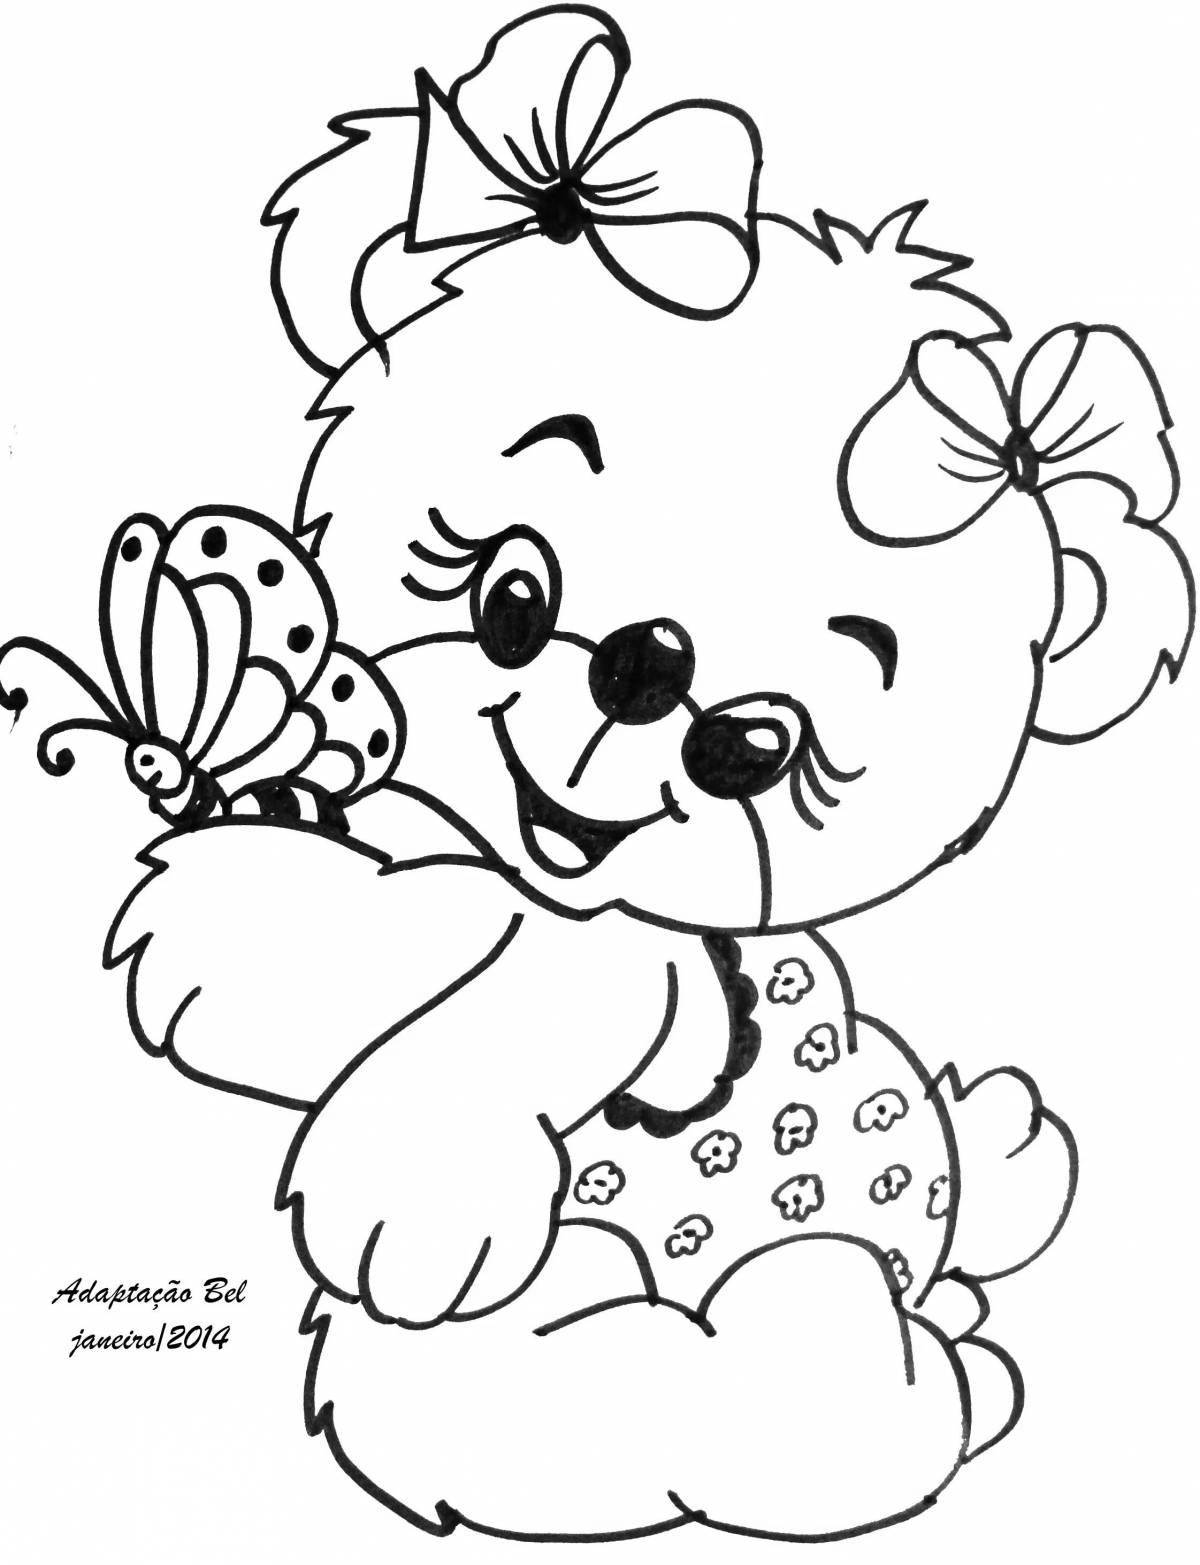 Soft cute teddy bear coloring page